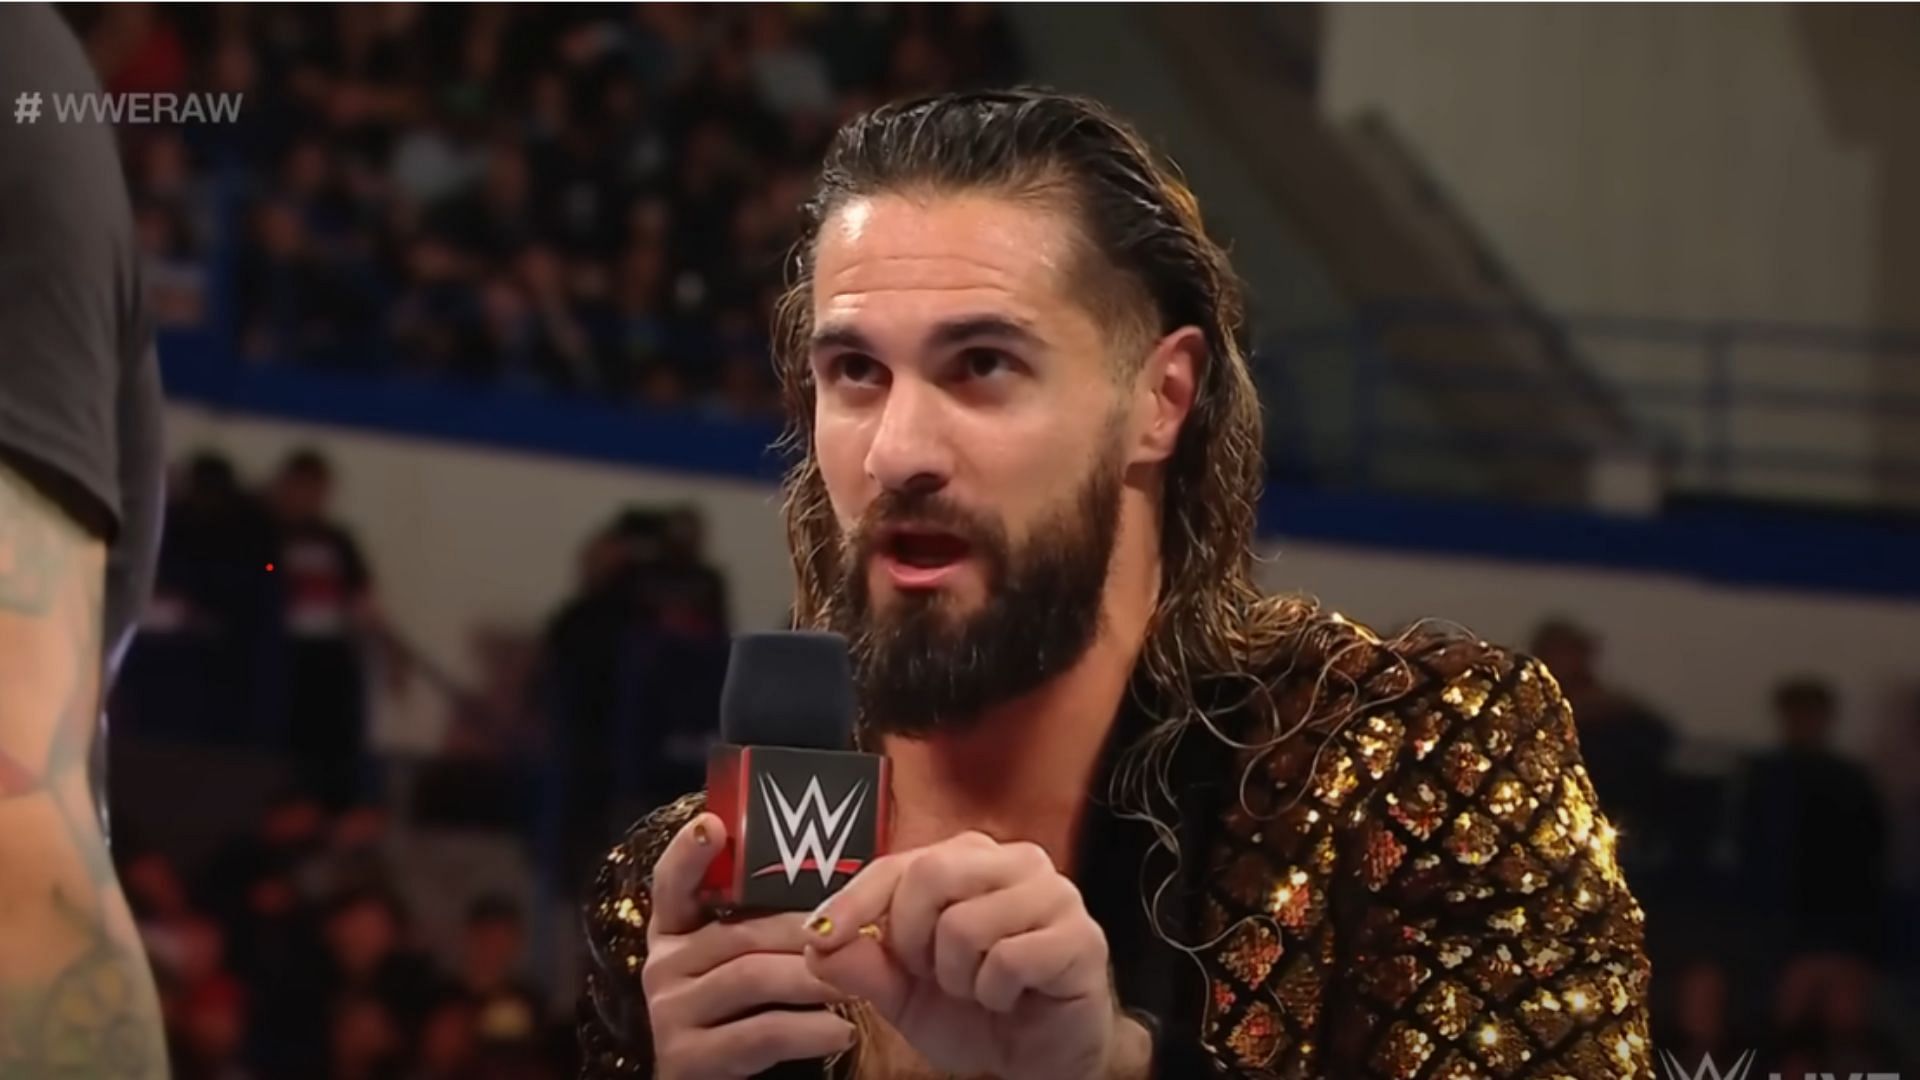 Seth Rollins has only defended his title three times on WWE TV